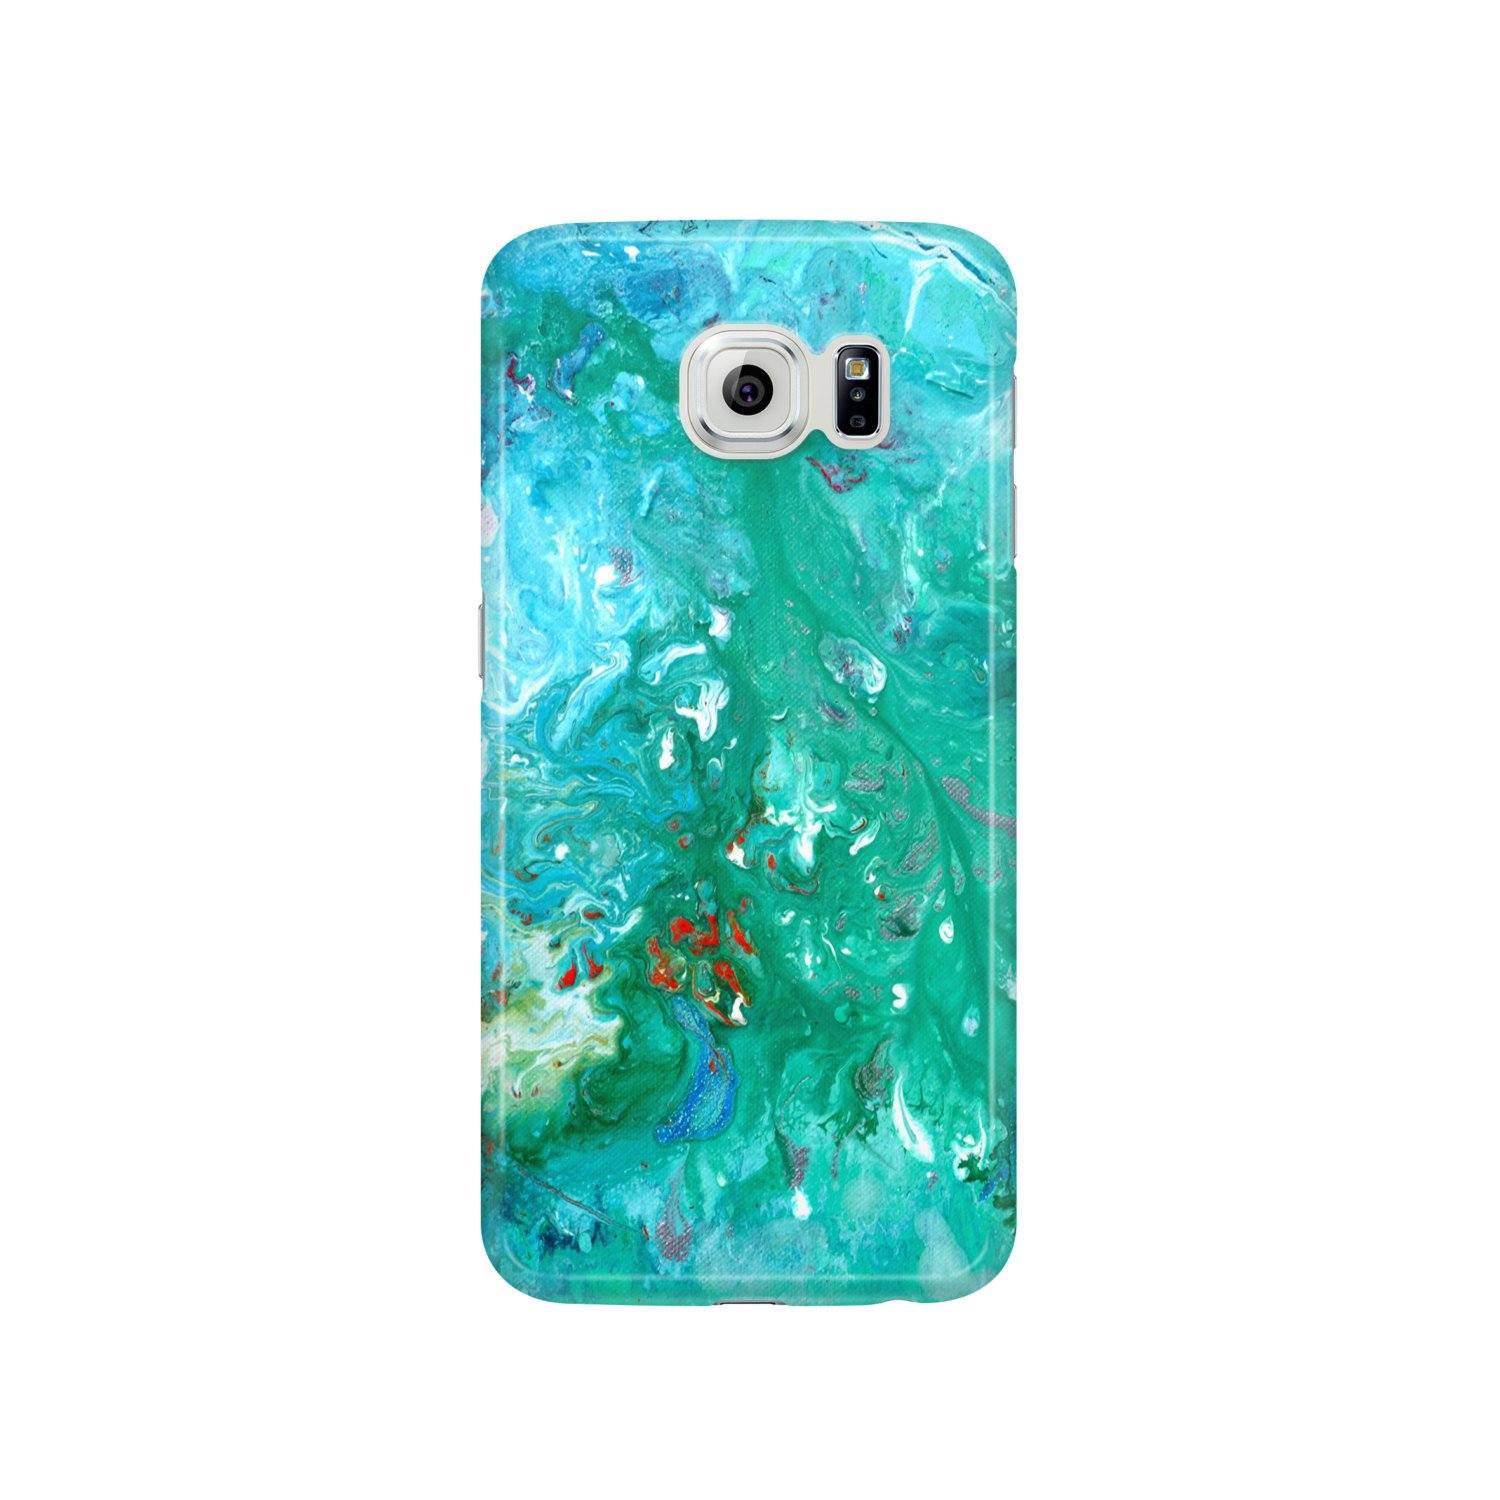 All at Sea Samsung Case - Louise Mead